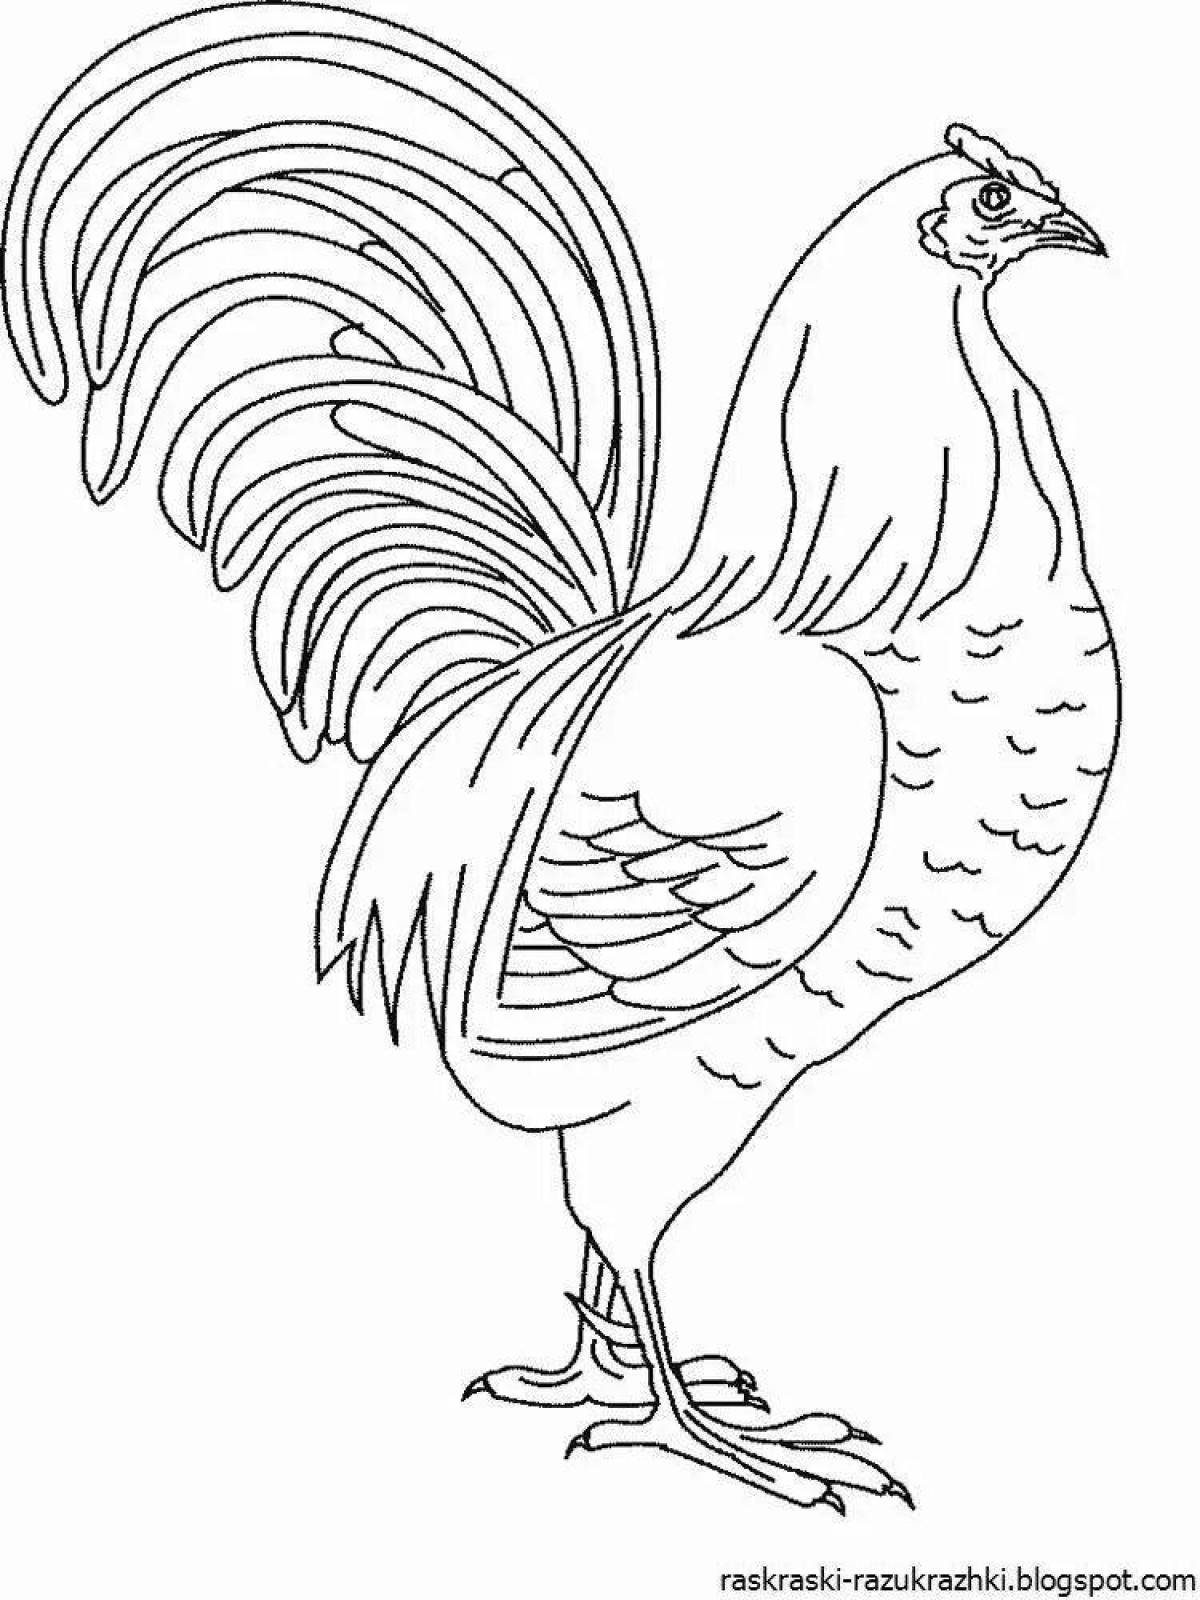 Rooster coloring page for kids